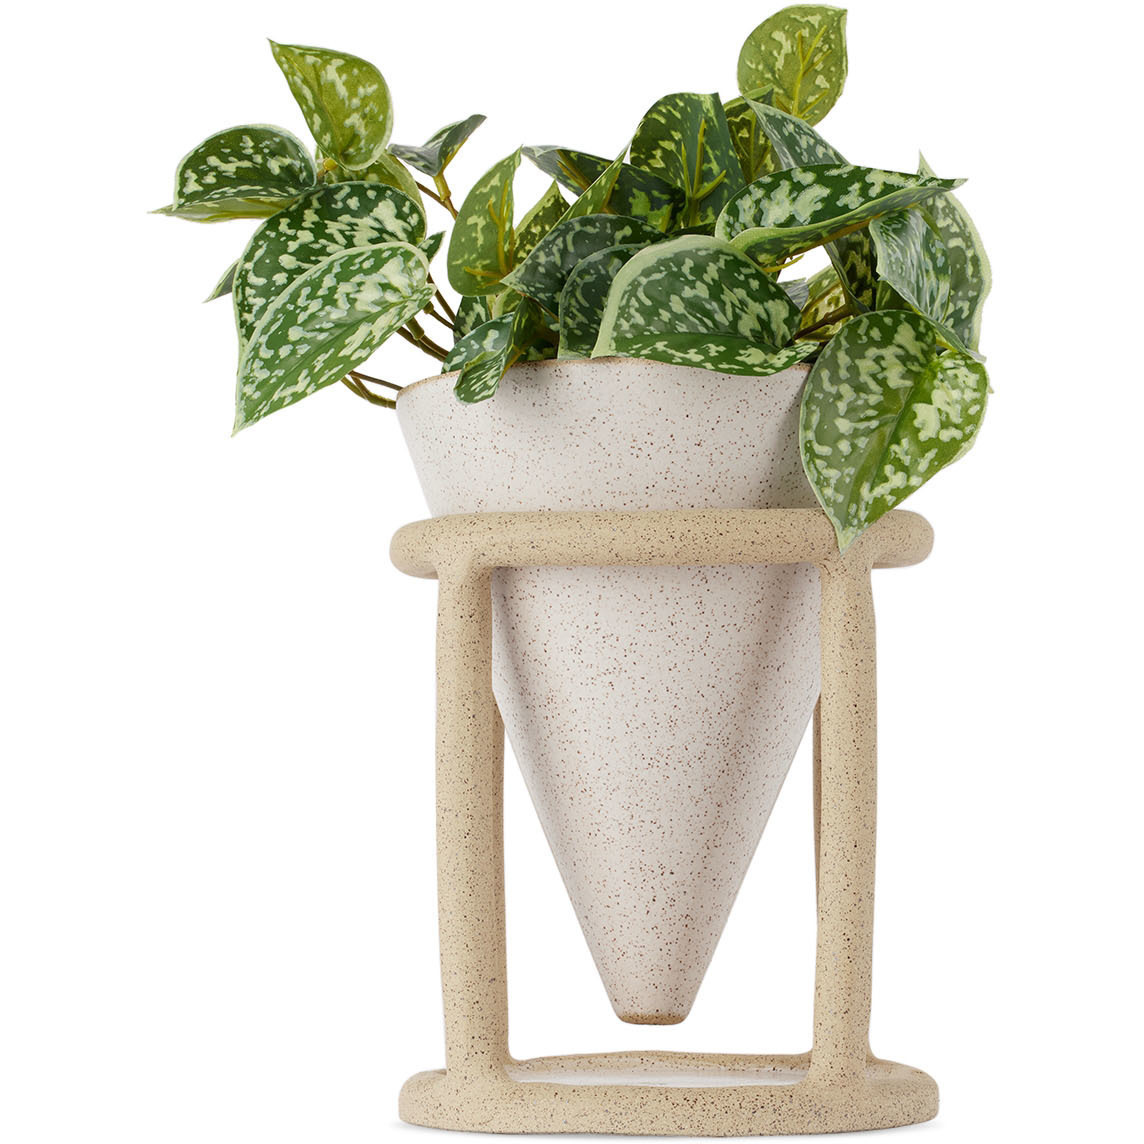 SIN Off-White Resevoir Table Planter - image 1